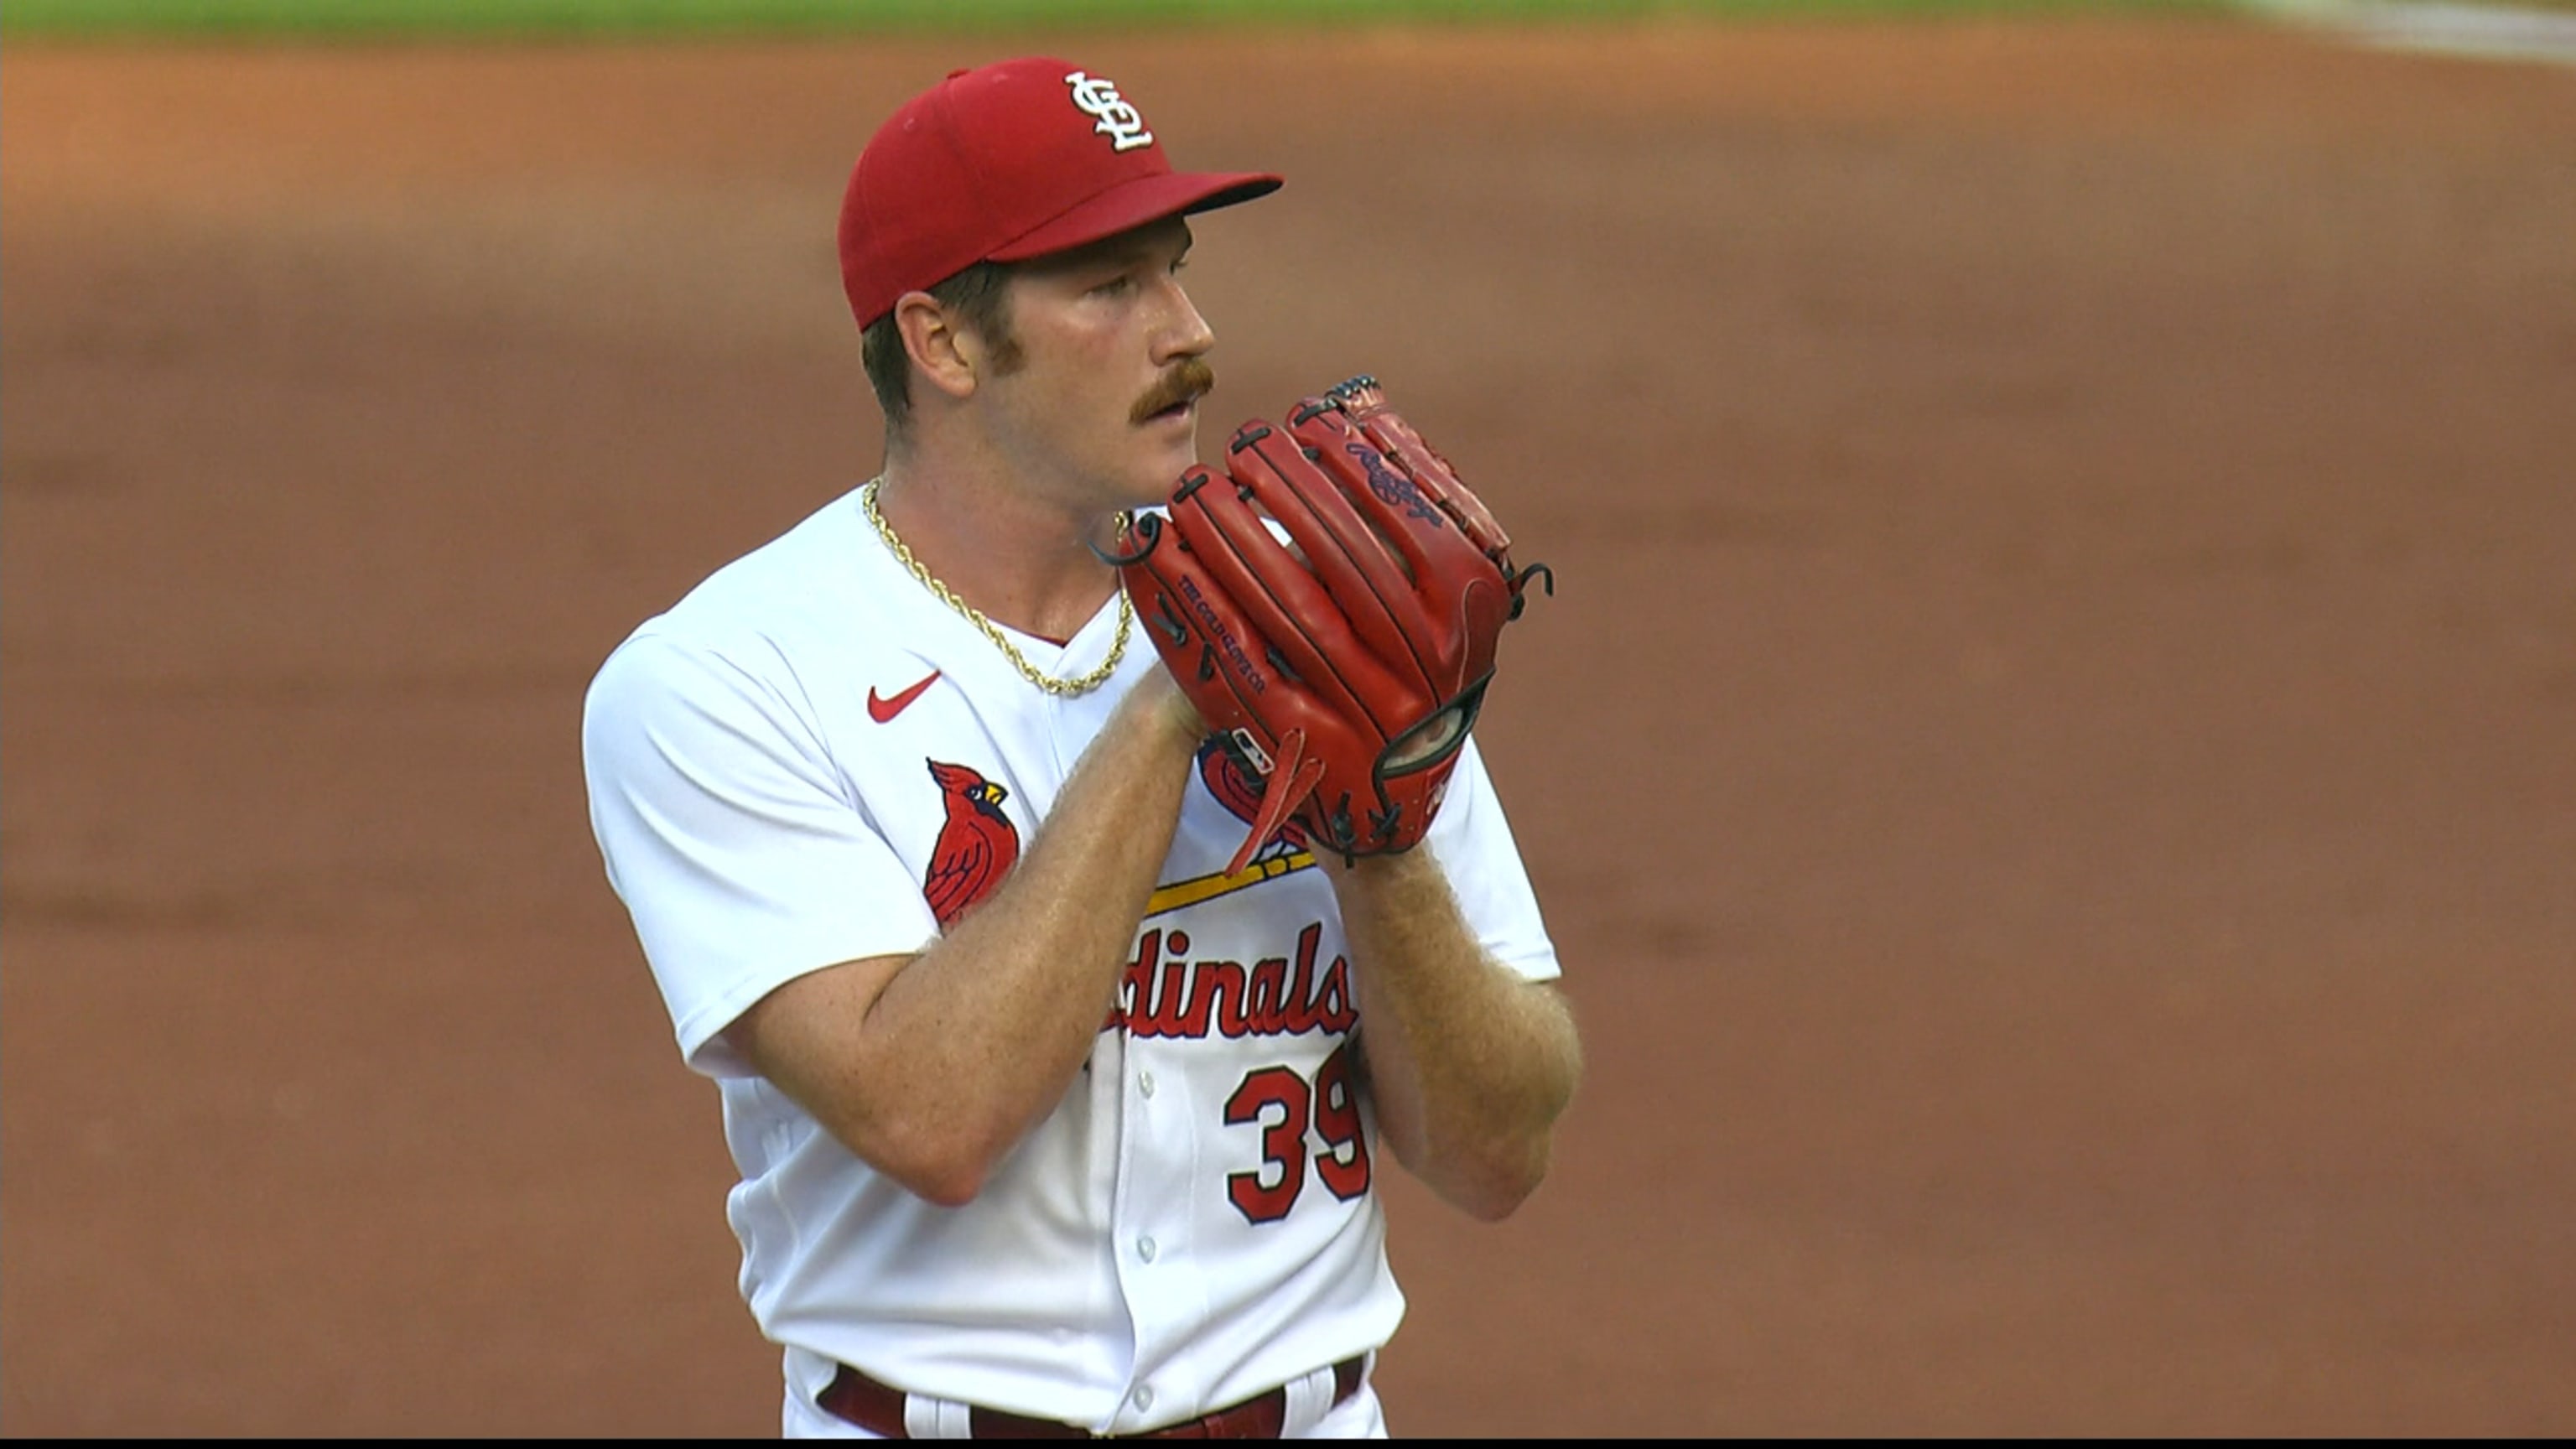 Cardinals pitcher Mikolas added to National League All-Star roster